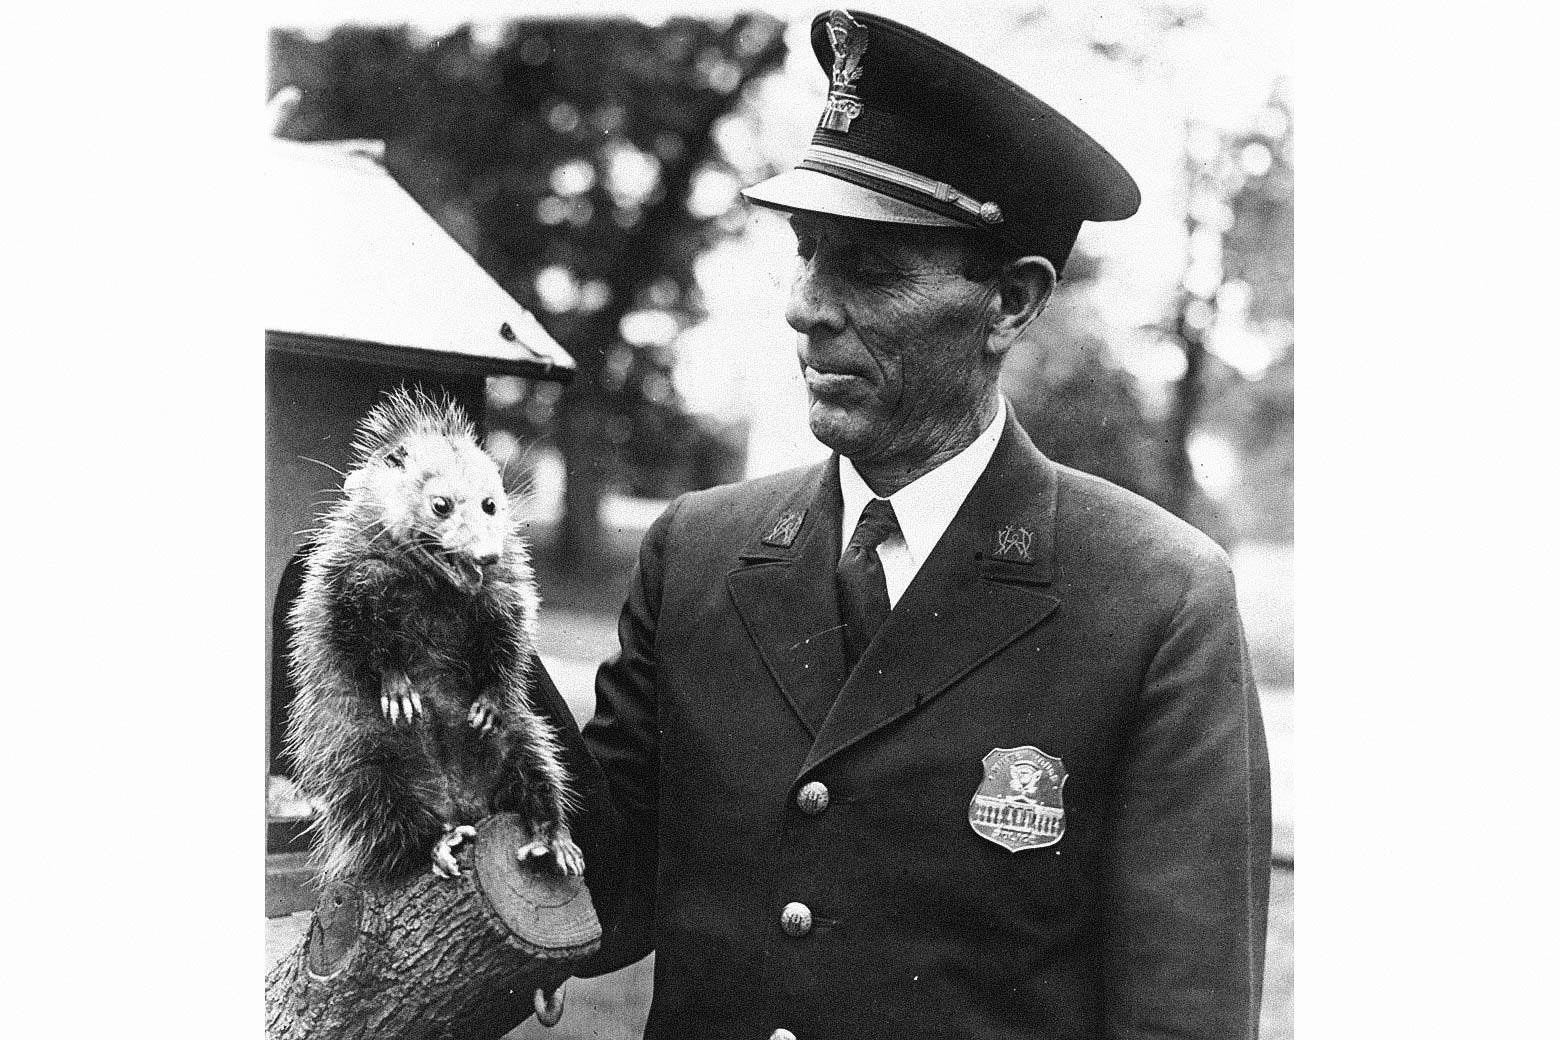 An insane-looking possum glares at the camera as a police officer looks on.